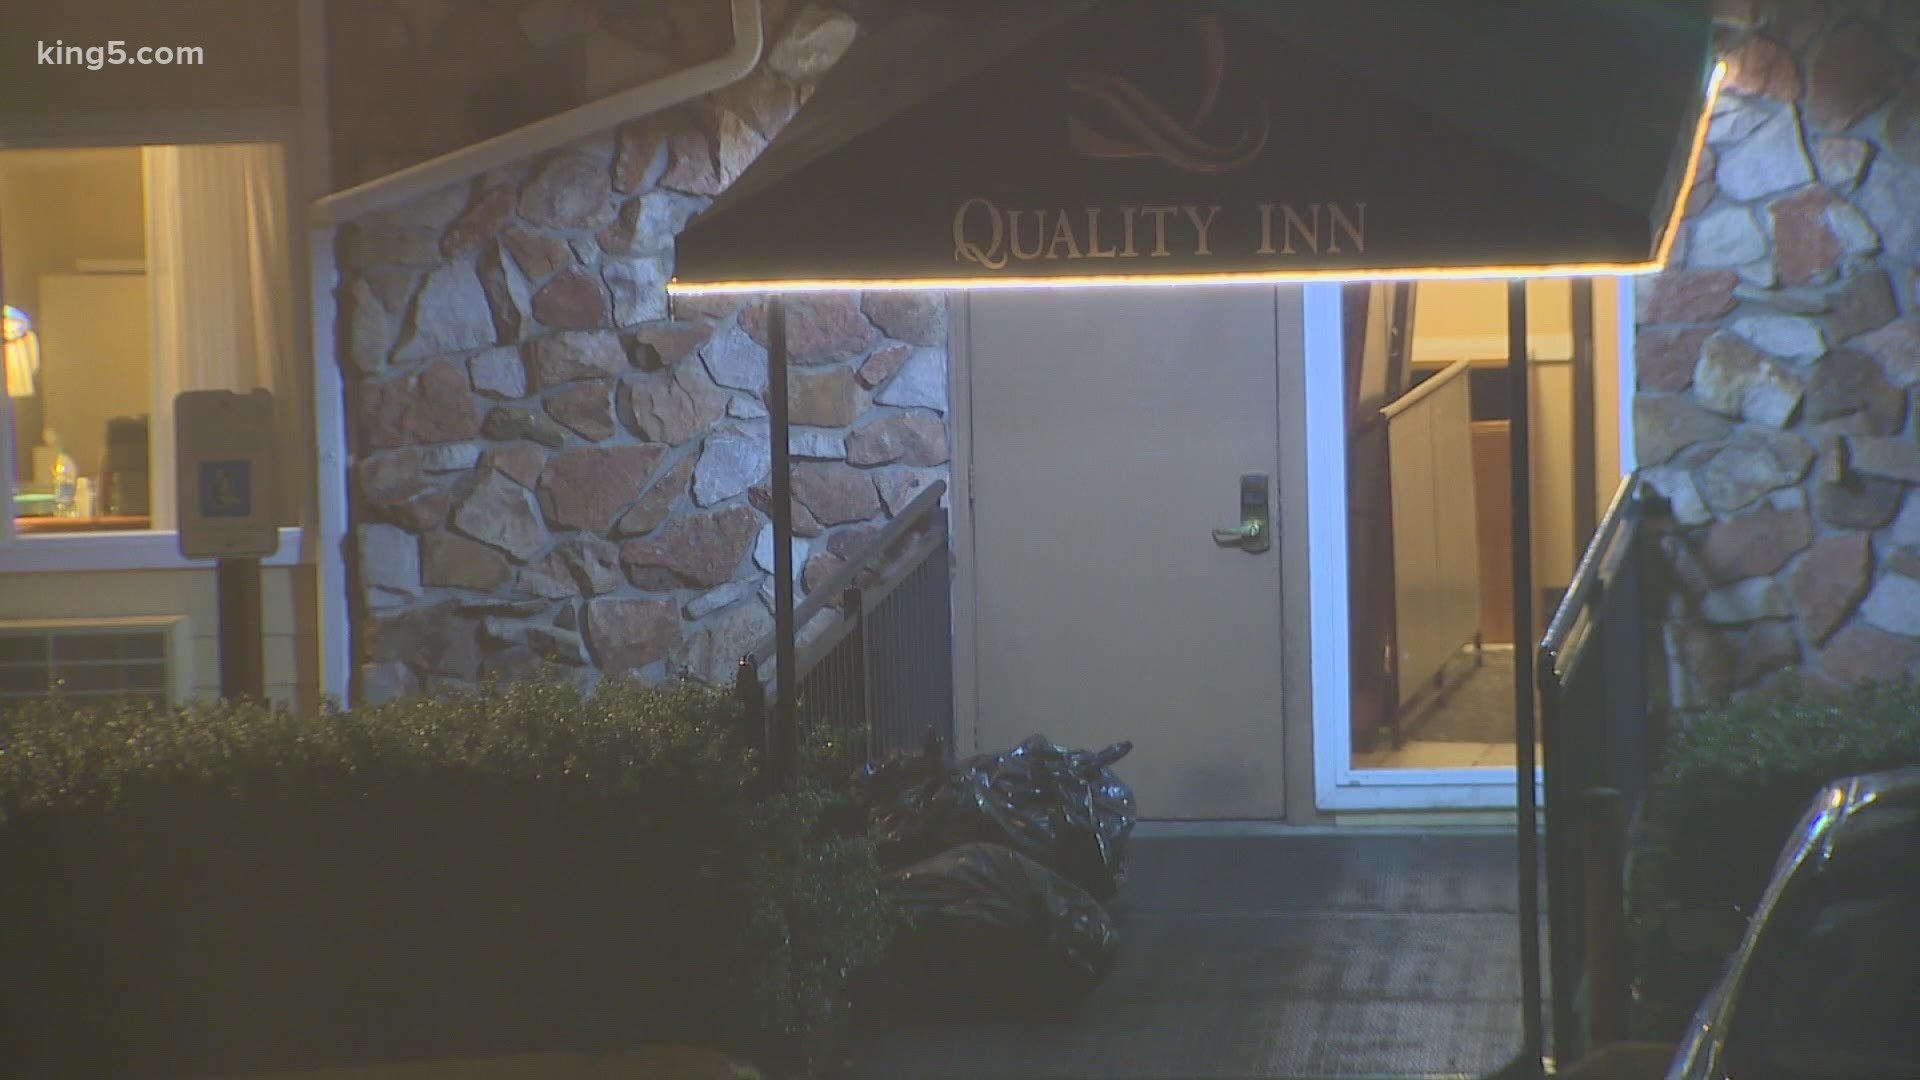 The City of SeaTac voted to temporarily restrict additional homeless shelters. It's the latest city to push back on King County over shelters set up in hotels.